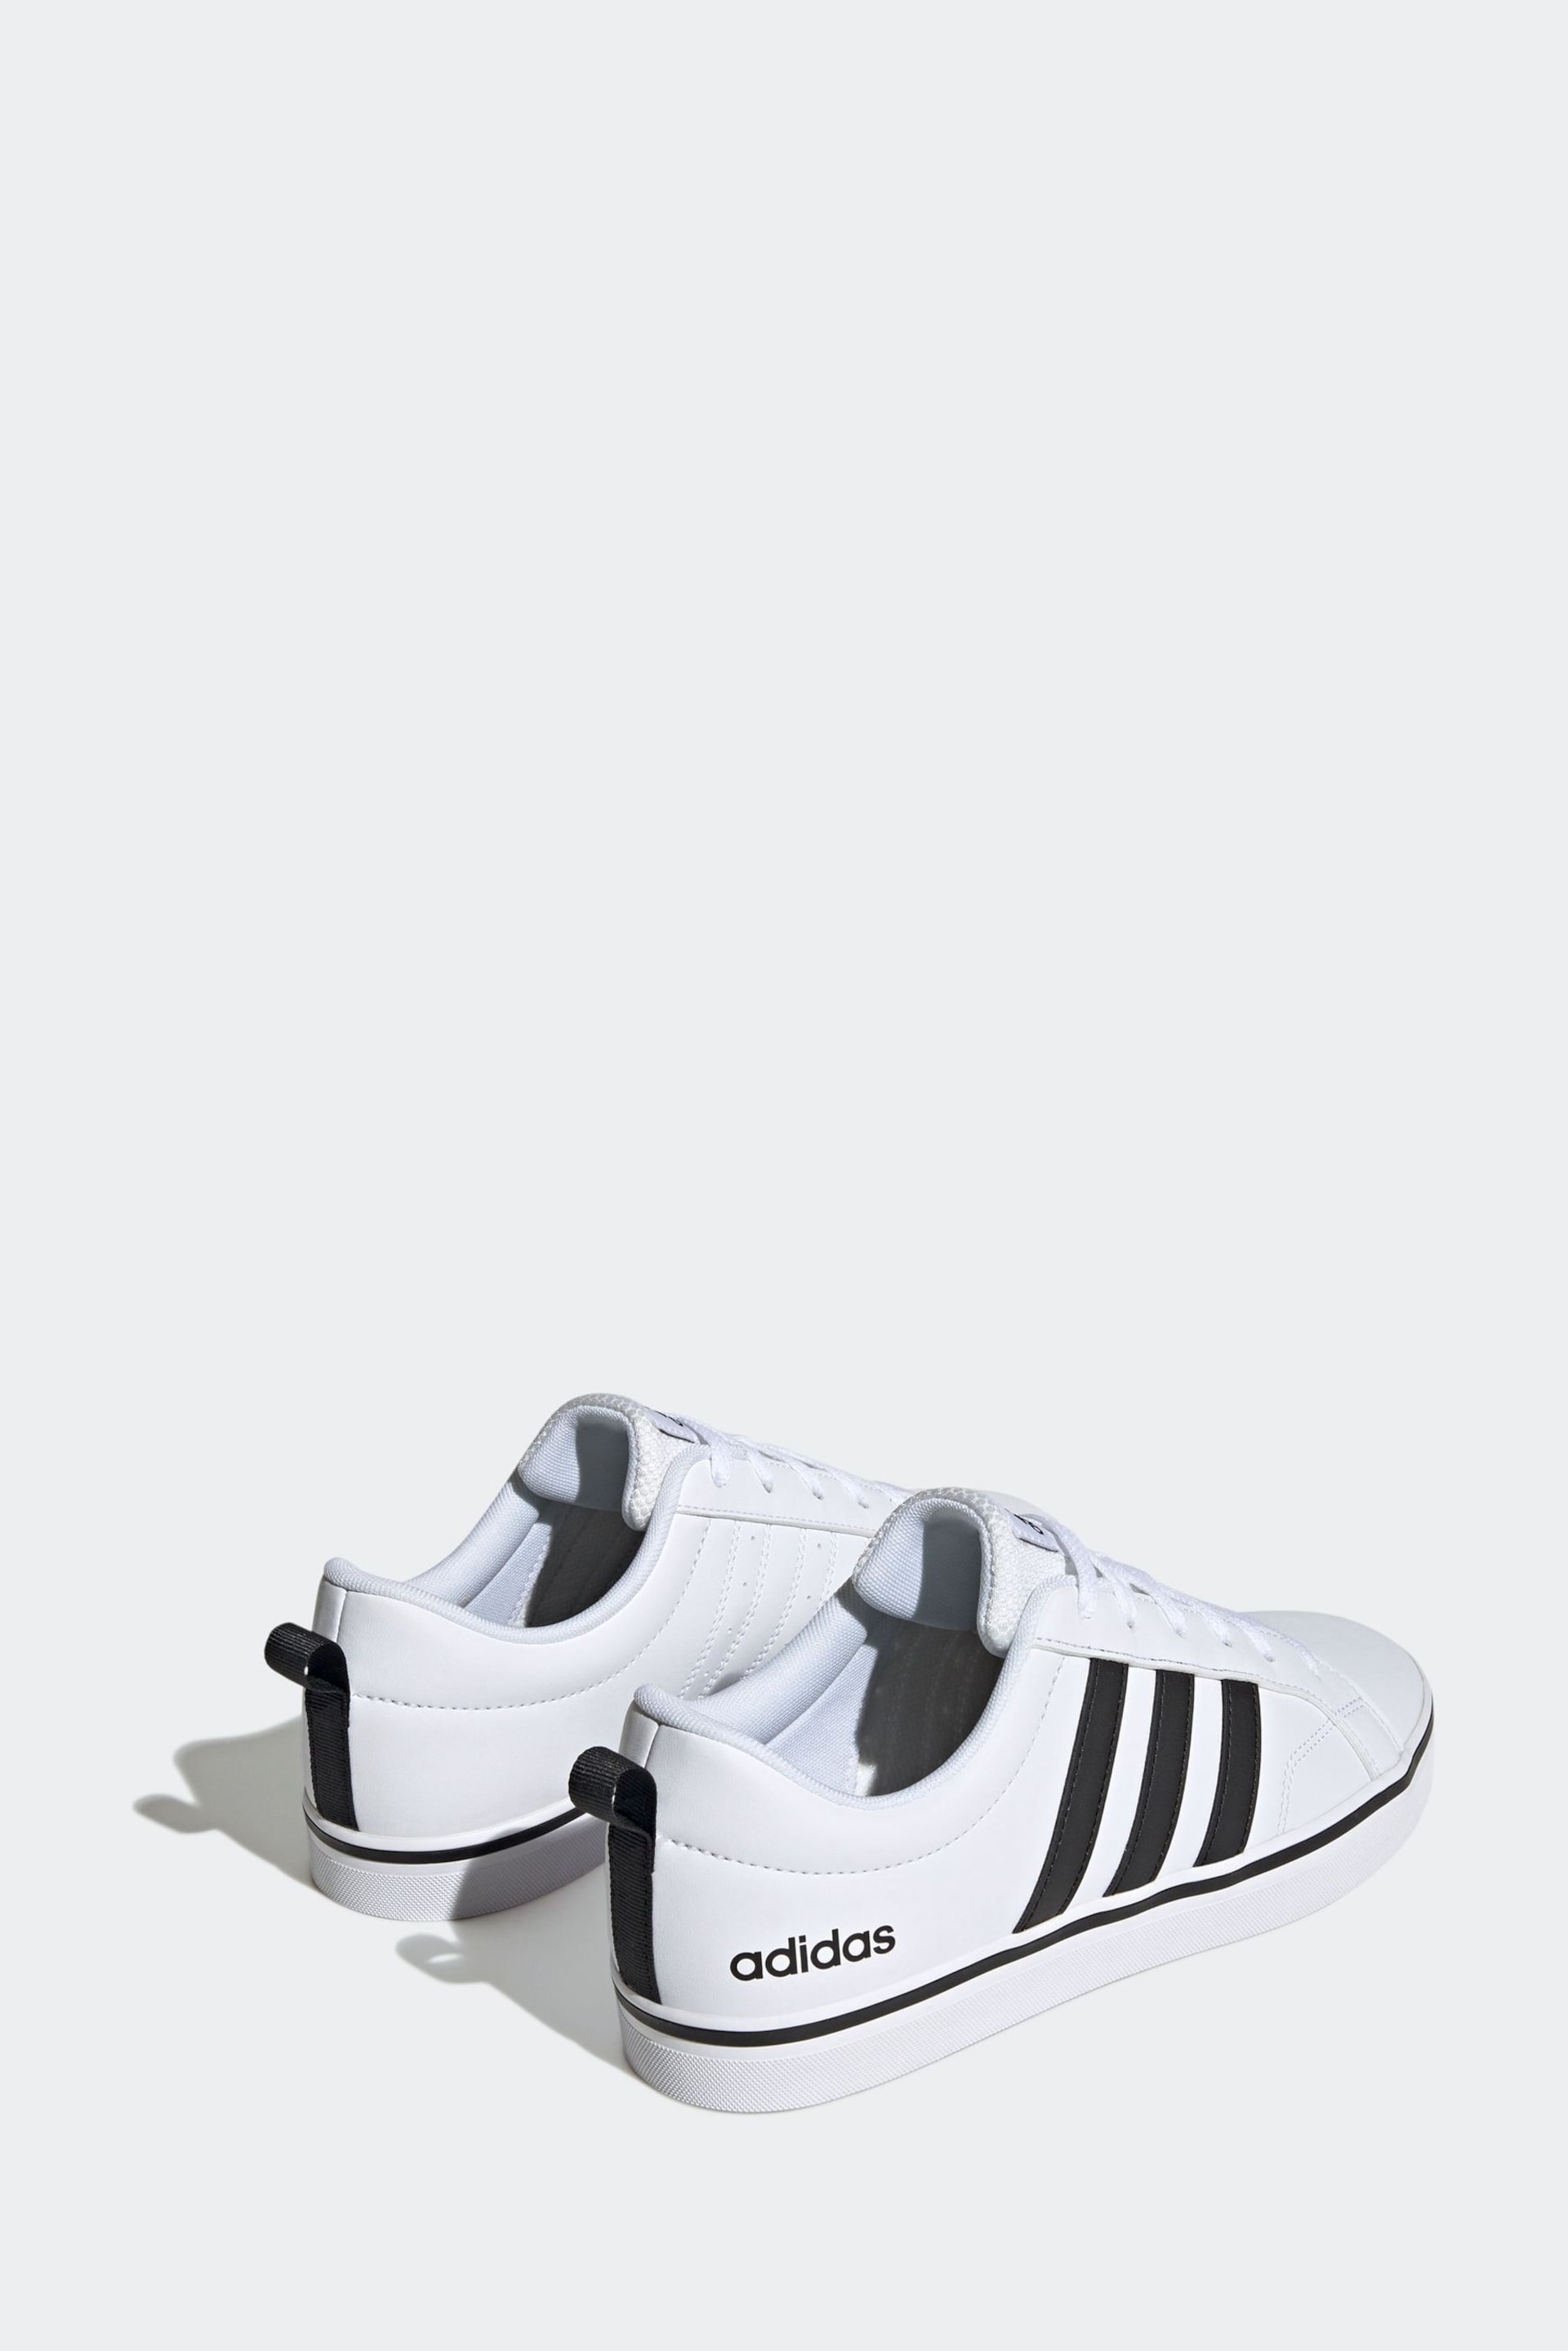 adidas White/Black Sportswear VS Pace Trainers - Image 4 of 9